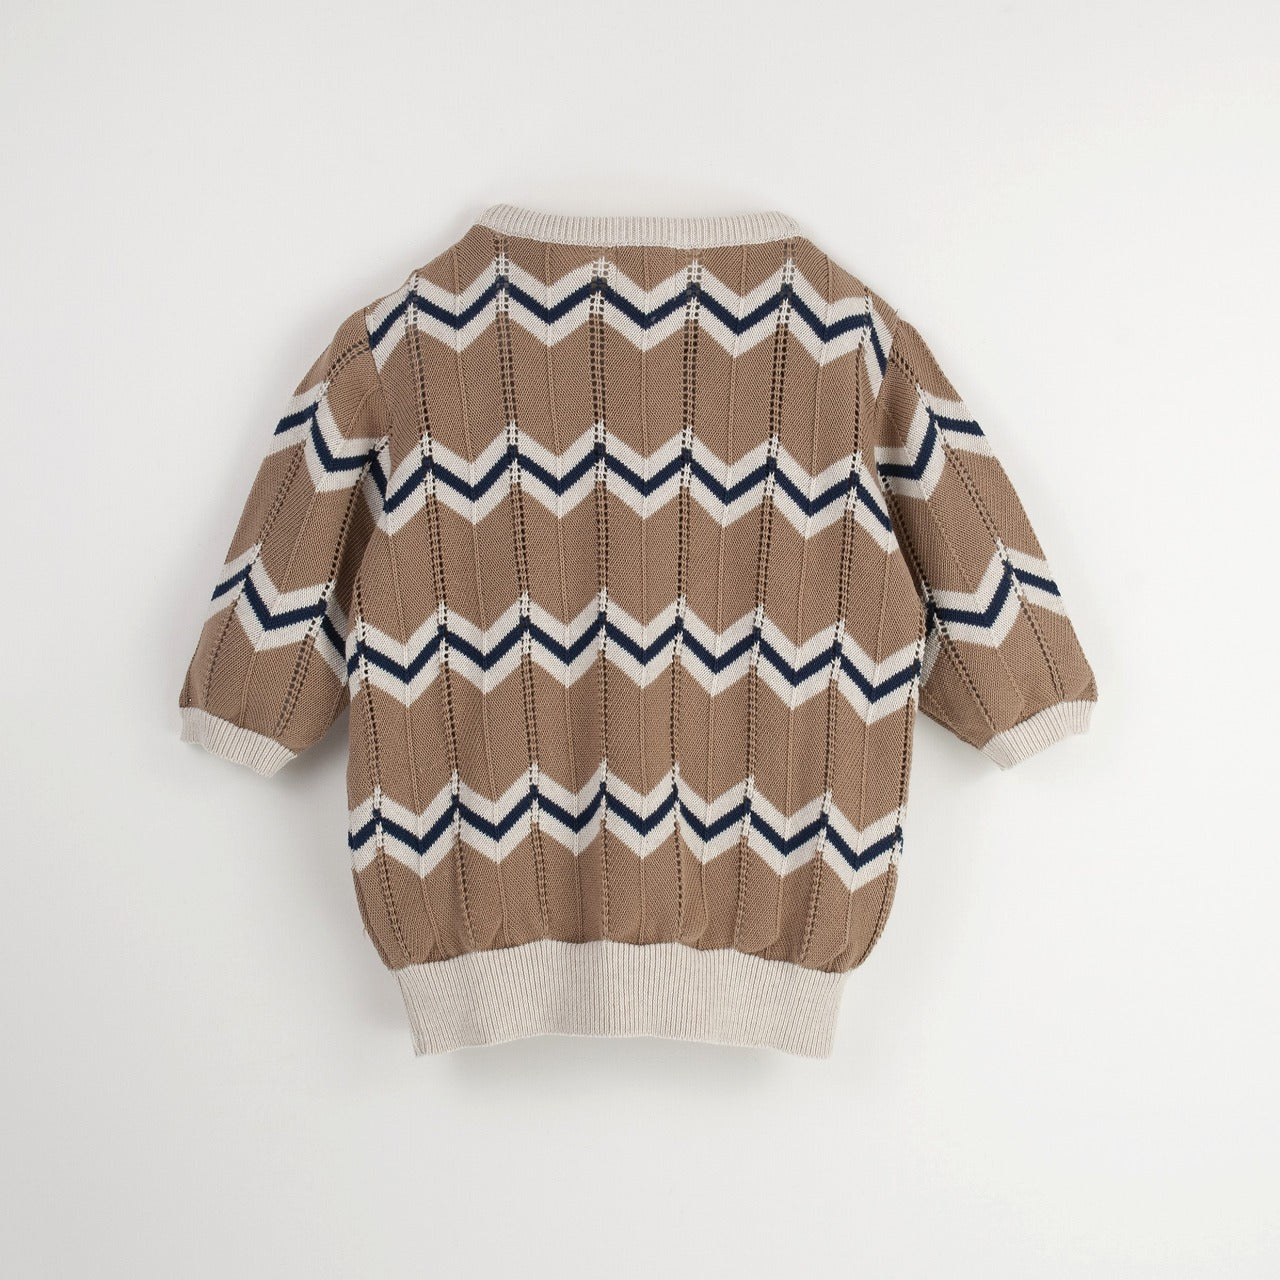 【Popelin】【30%OFF】Brown openwork knit jersey ニットジャージー 12/18m,18/24m  | Coucoubebe/ククベベ